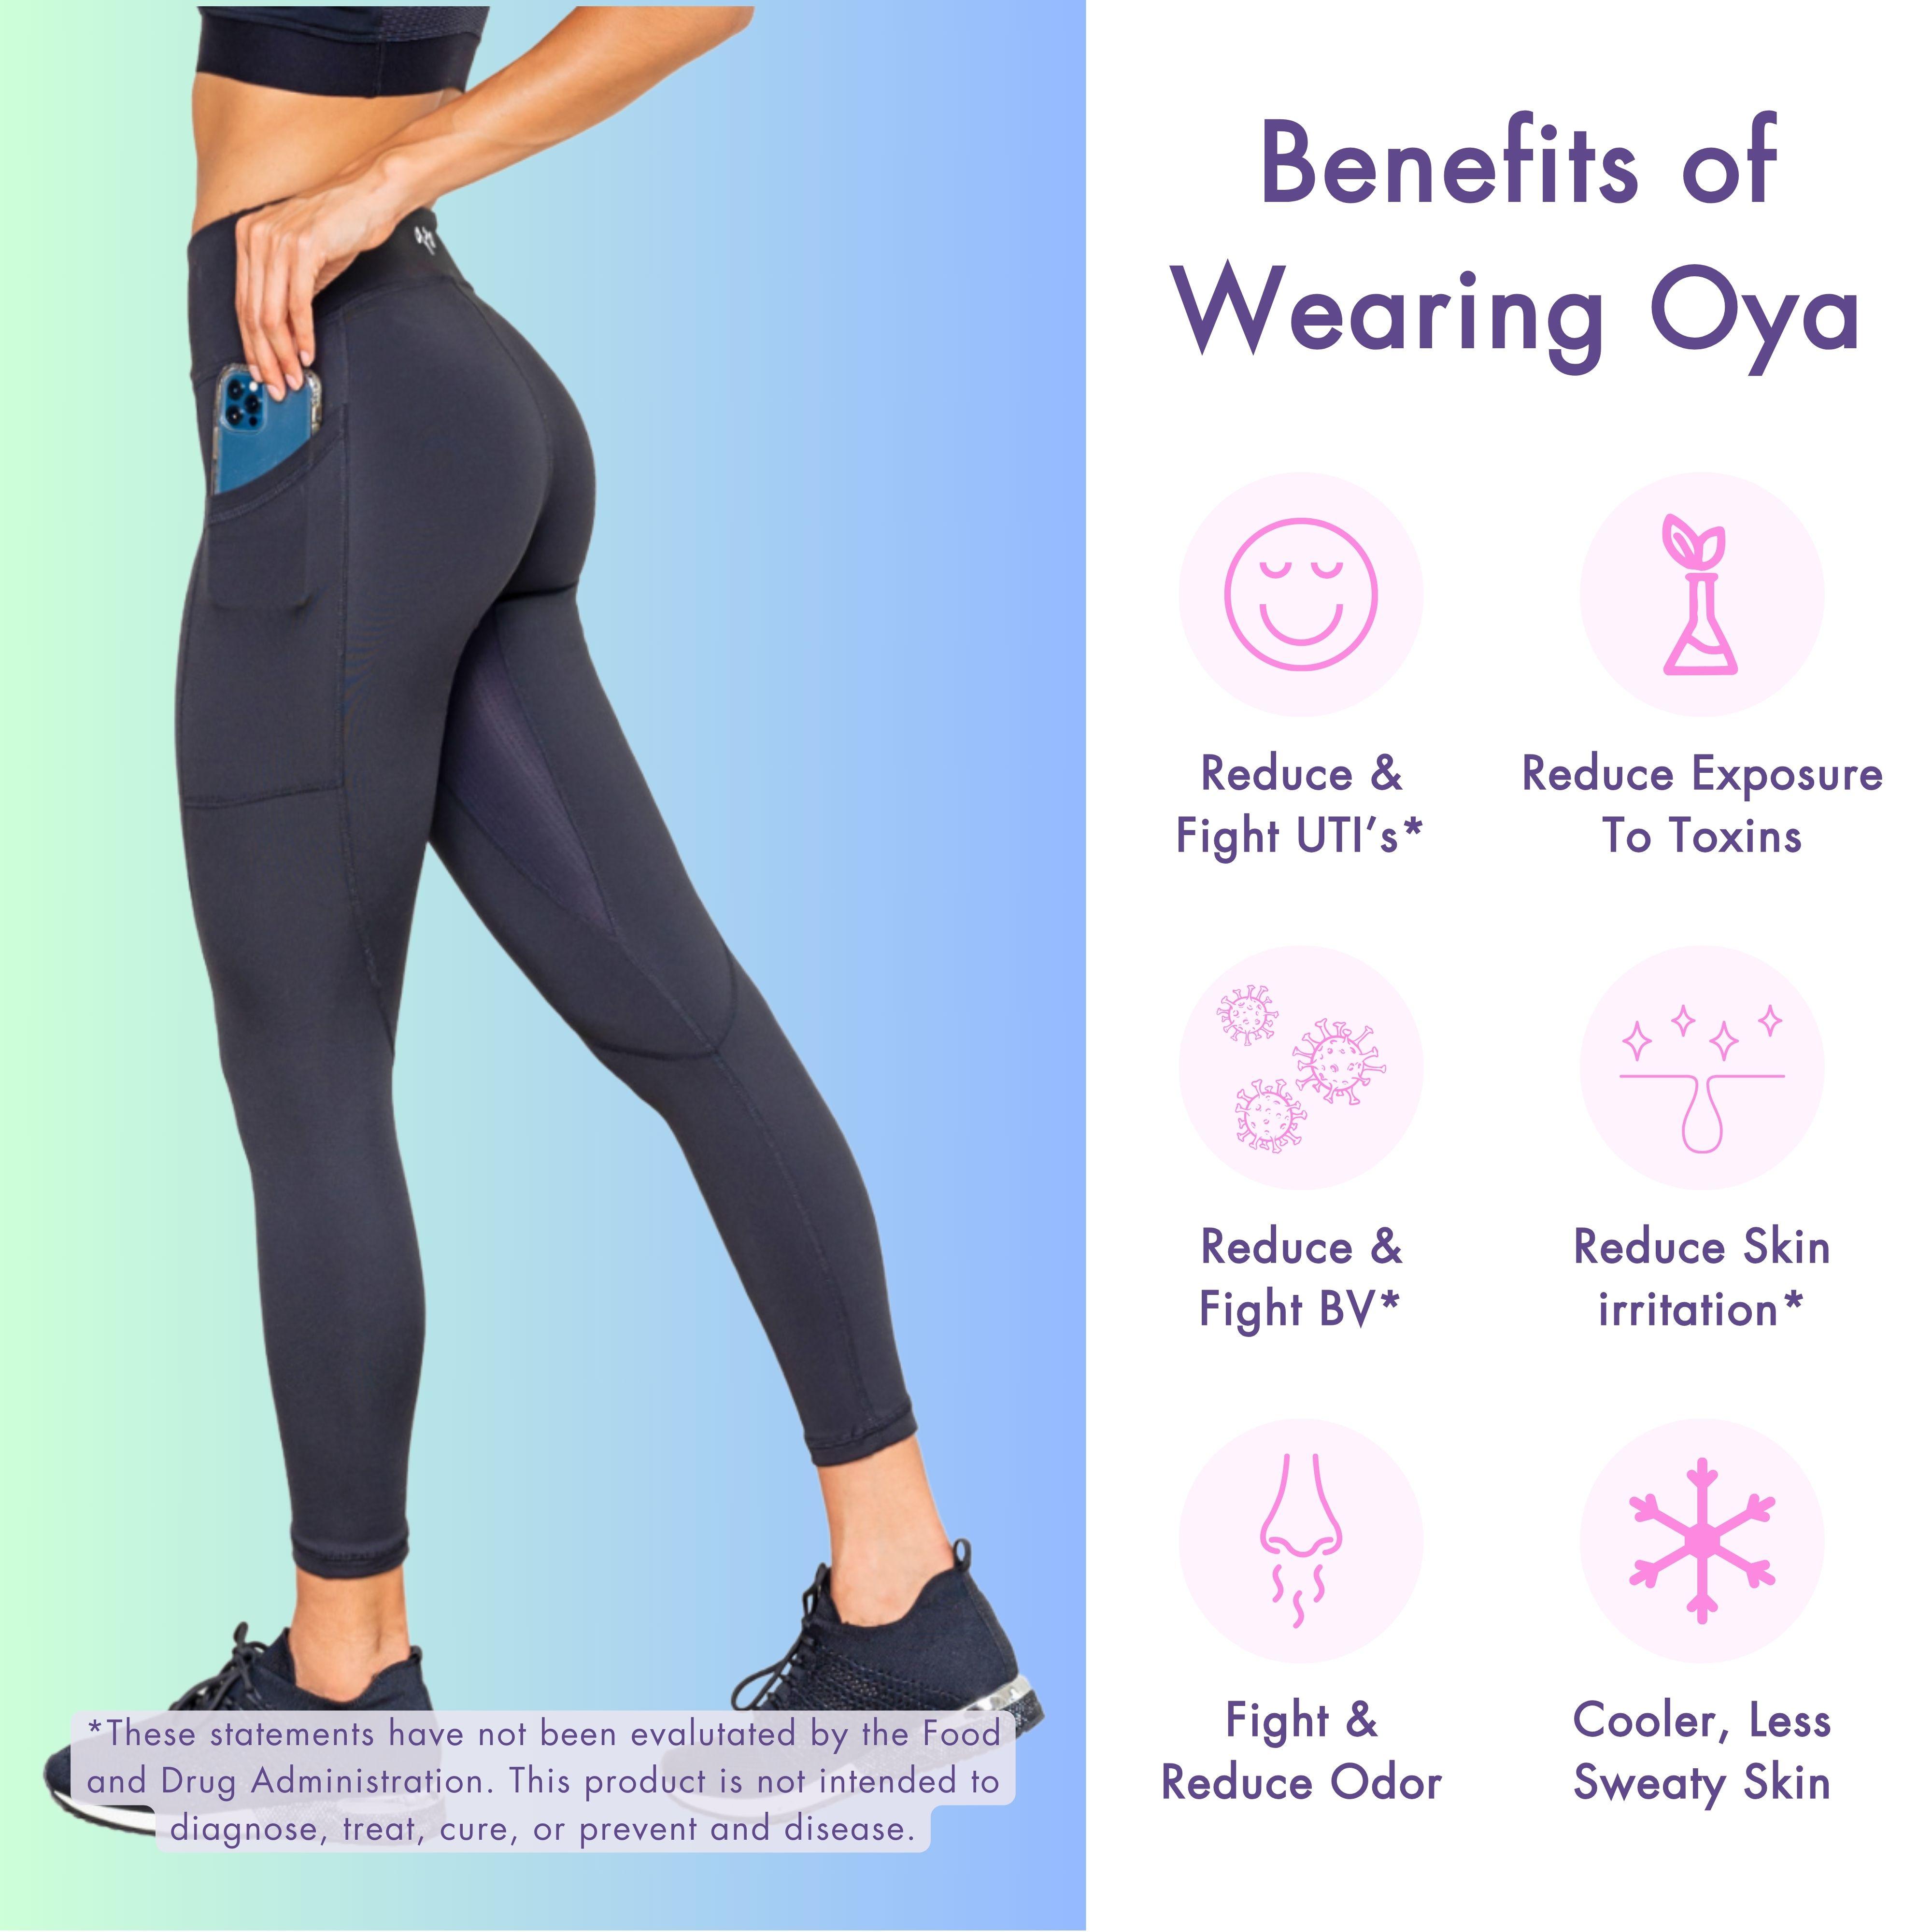 Do Tight Workout Leggings Really Cause Yeast Infections?